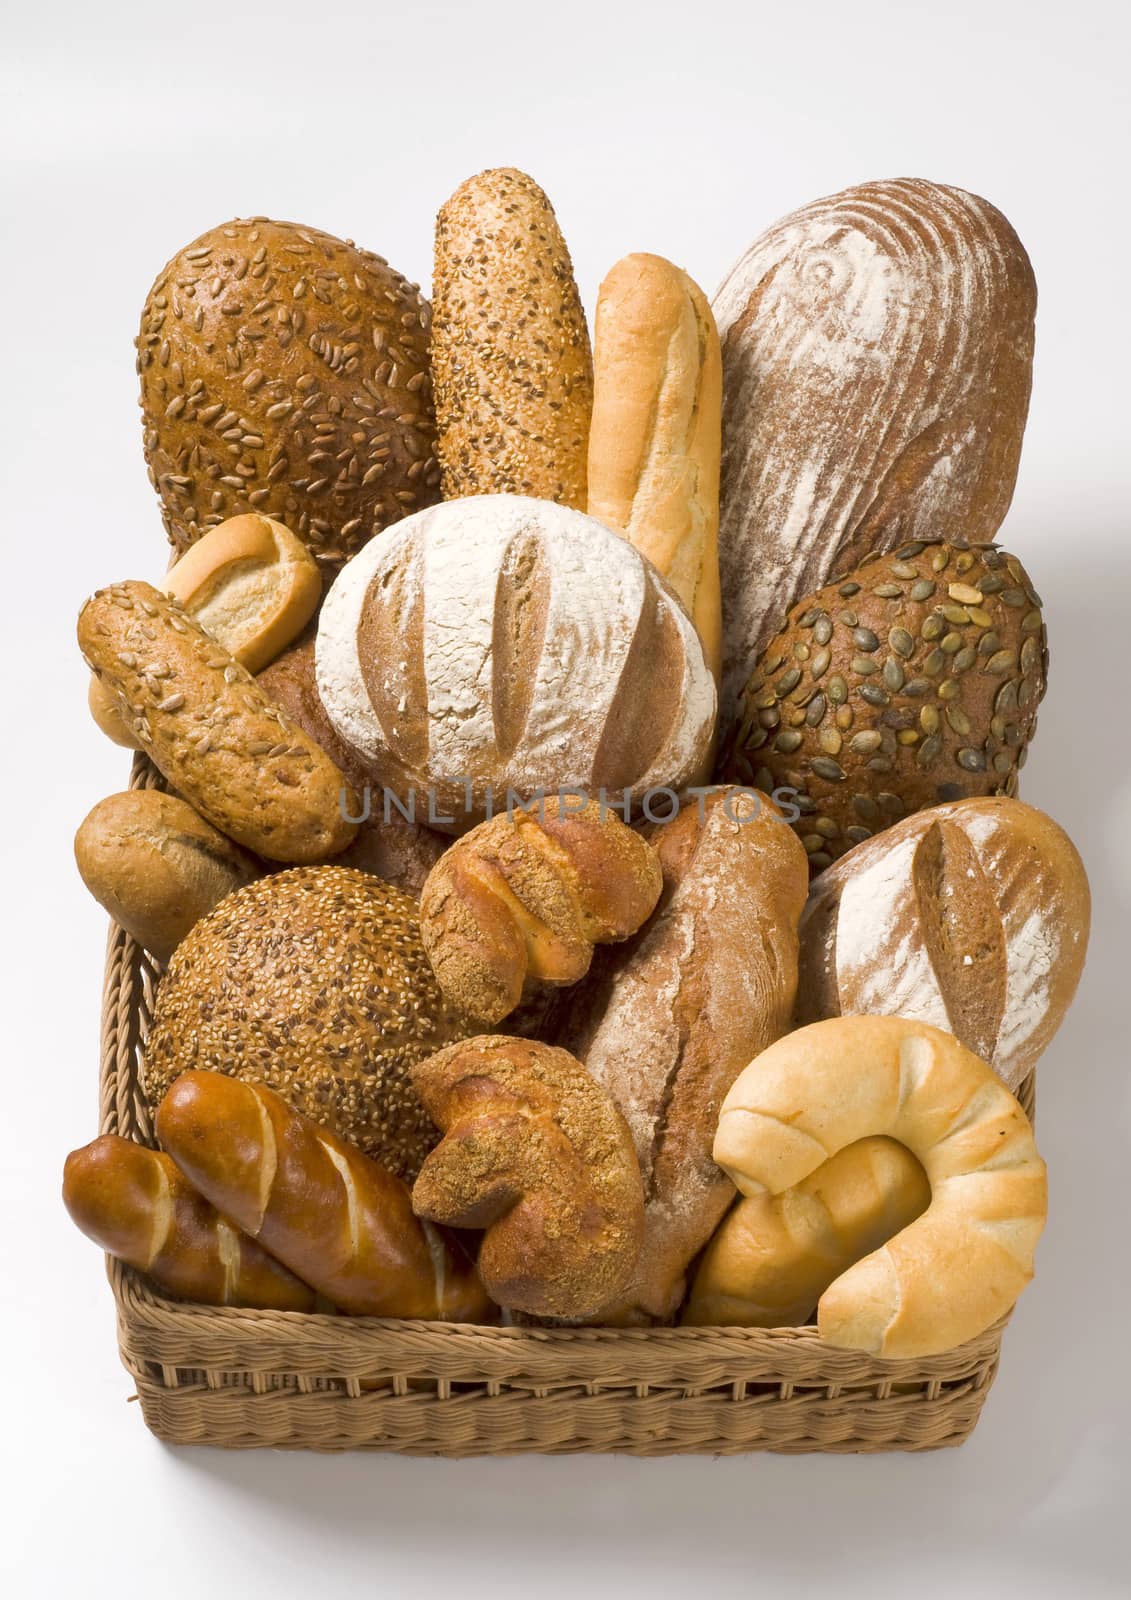 Variety of baked products in a basket